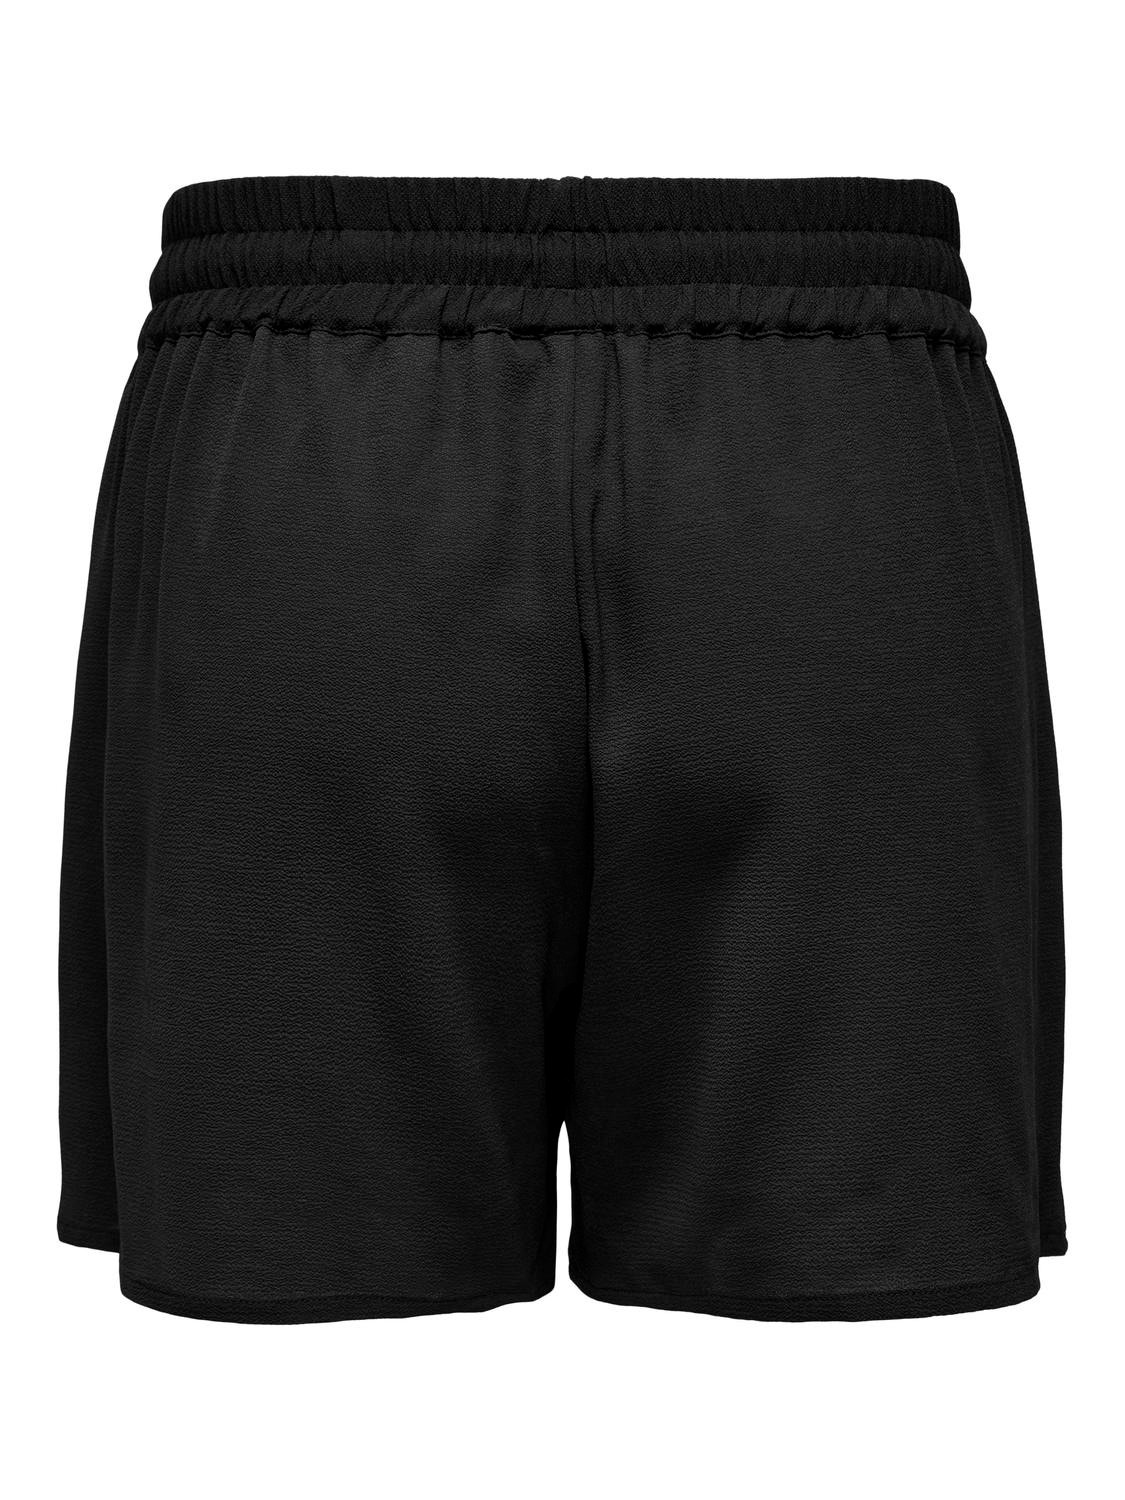 ONLY Normal passform Shorts -Black - 15312230